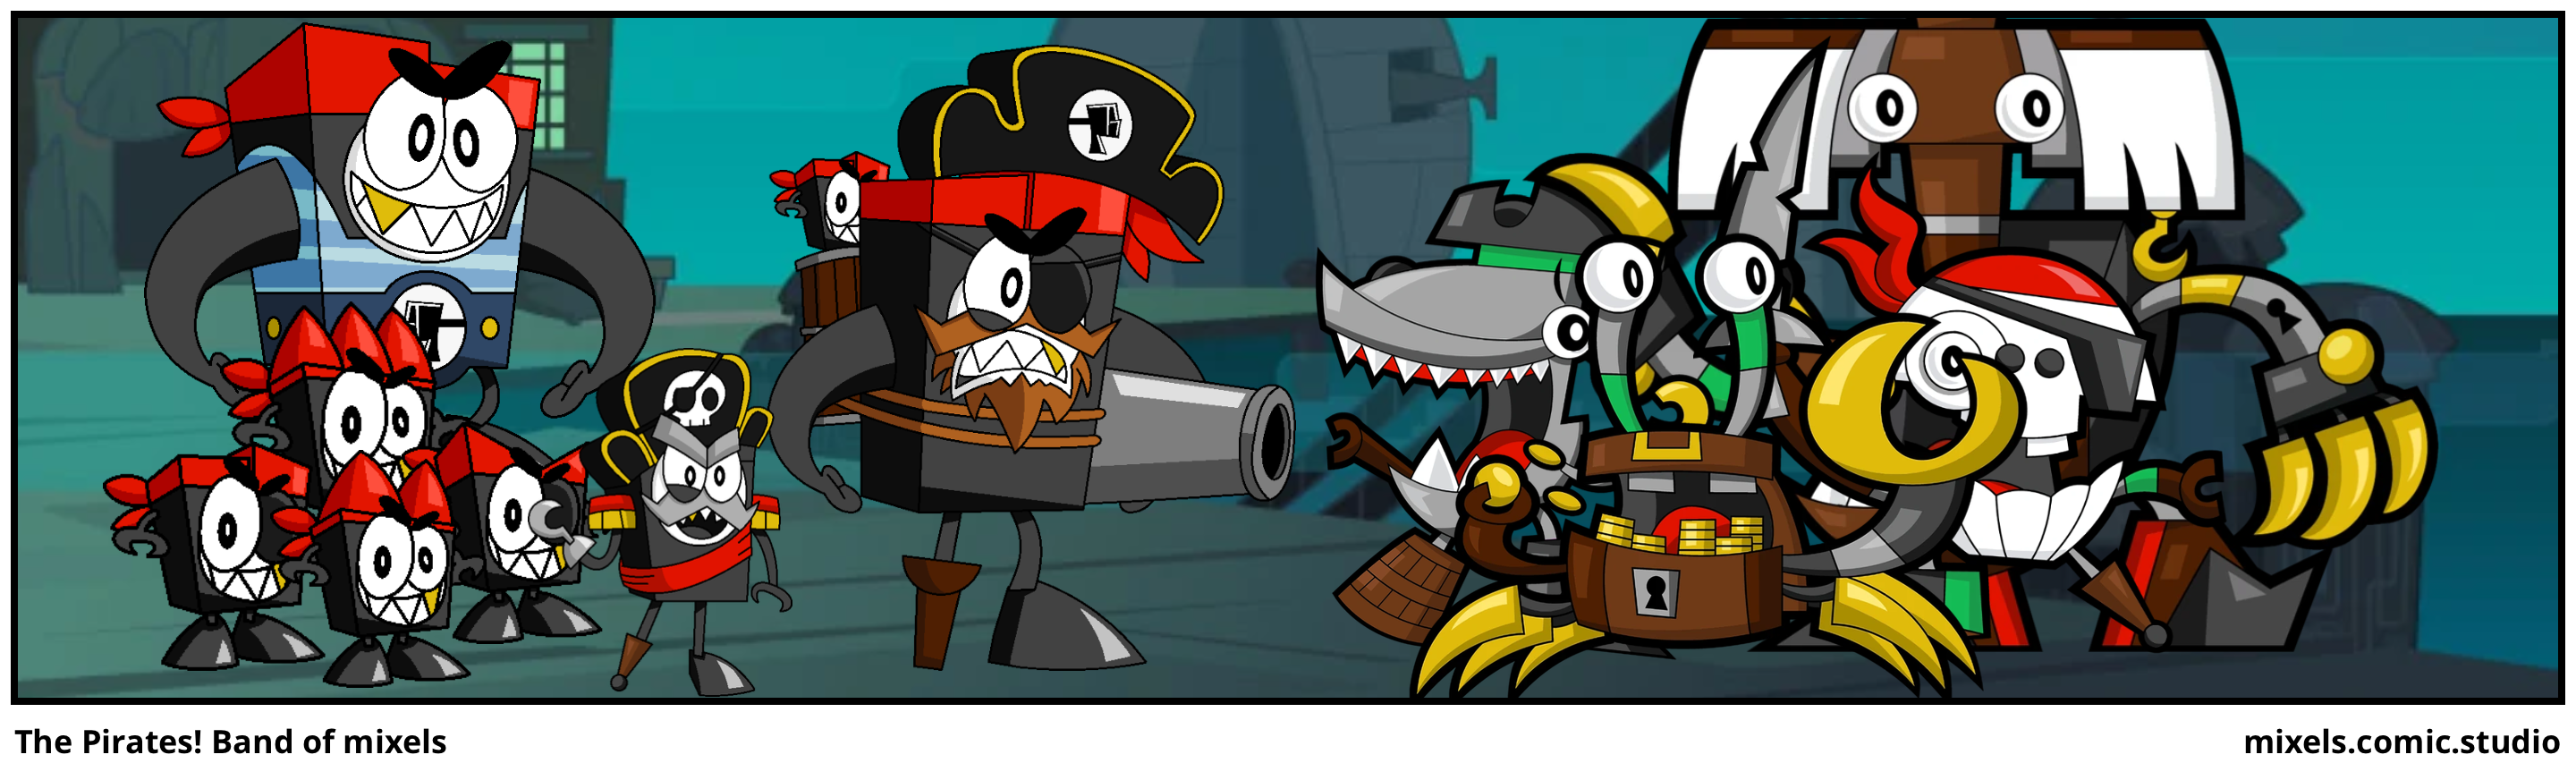 The Pirates! Band of mixels